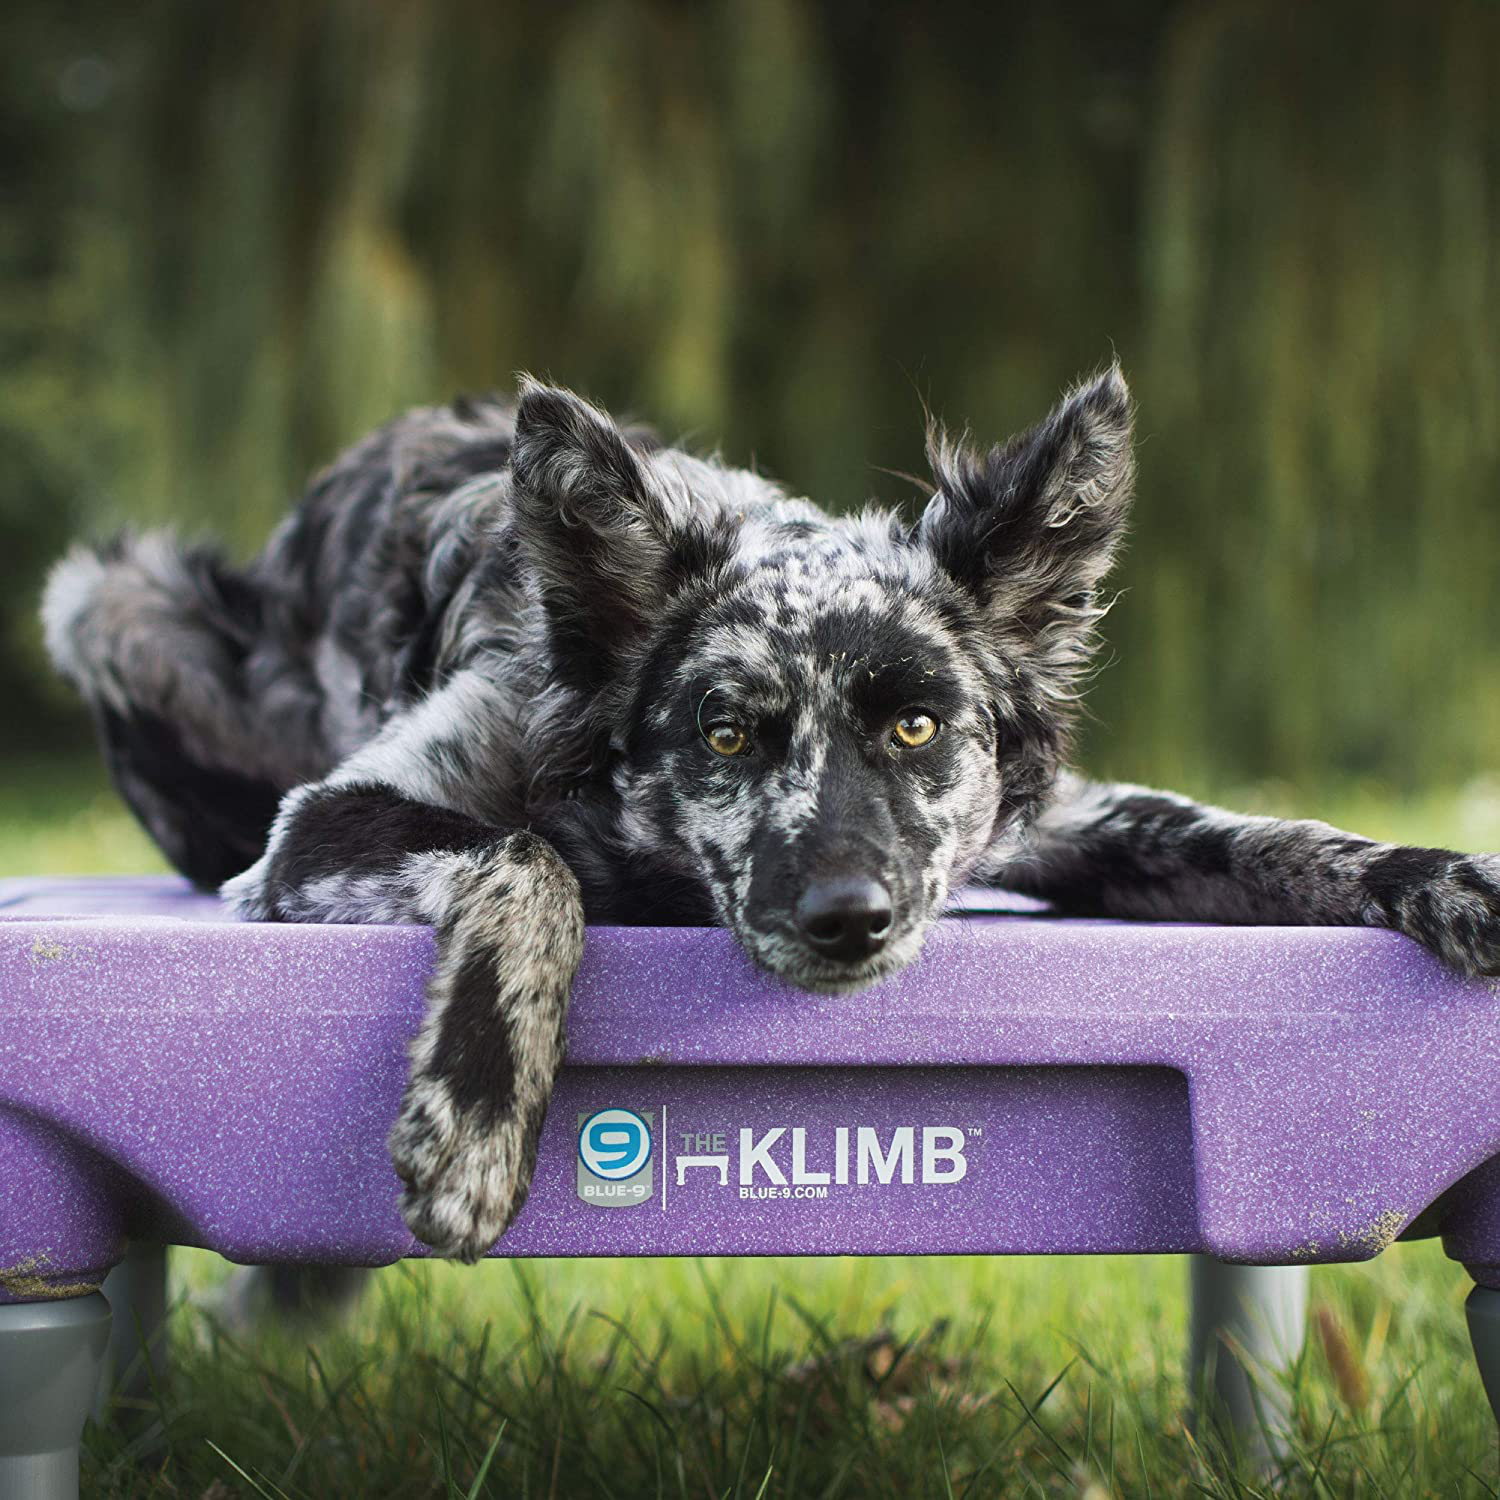 Blue-9 Klimb Training Kit, Professionally Designed Dog Platform and Accessories for Training and Agility and Accessories Animals & Pet Supplies > Pet Supplies > Dog Supplies > Dog Treadmills Blue-9   